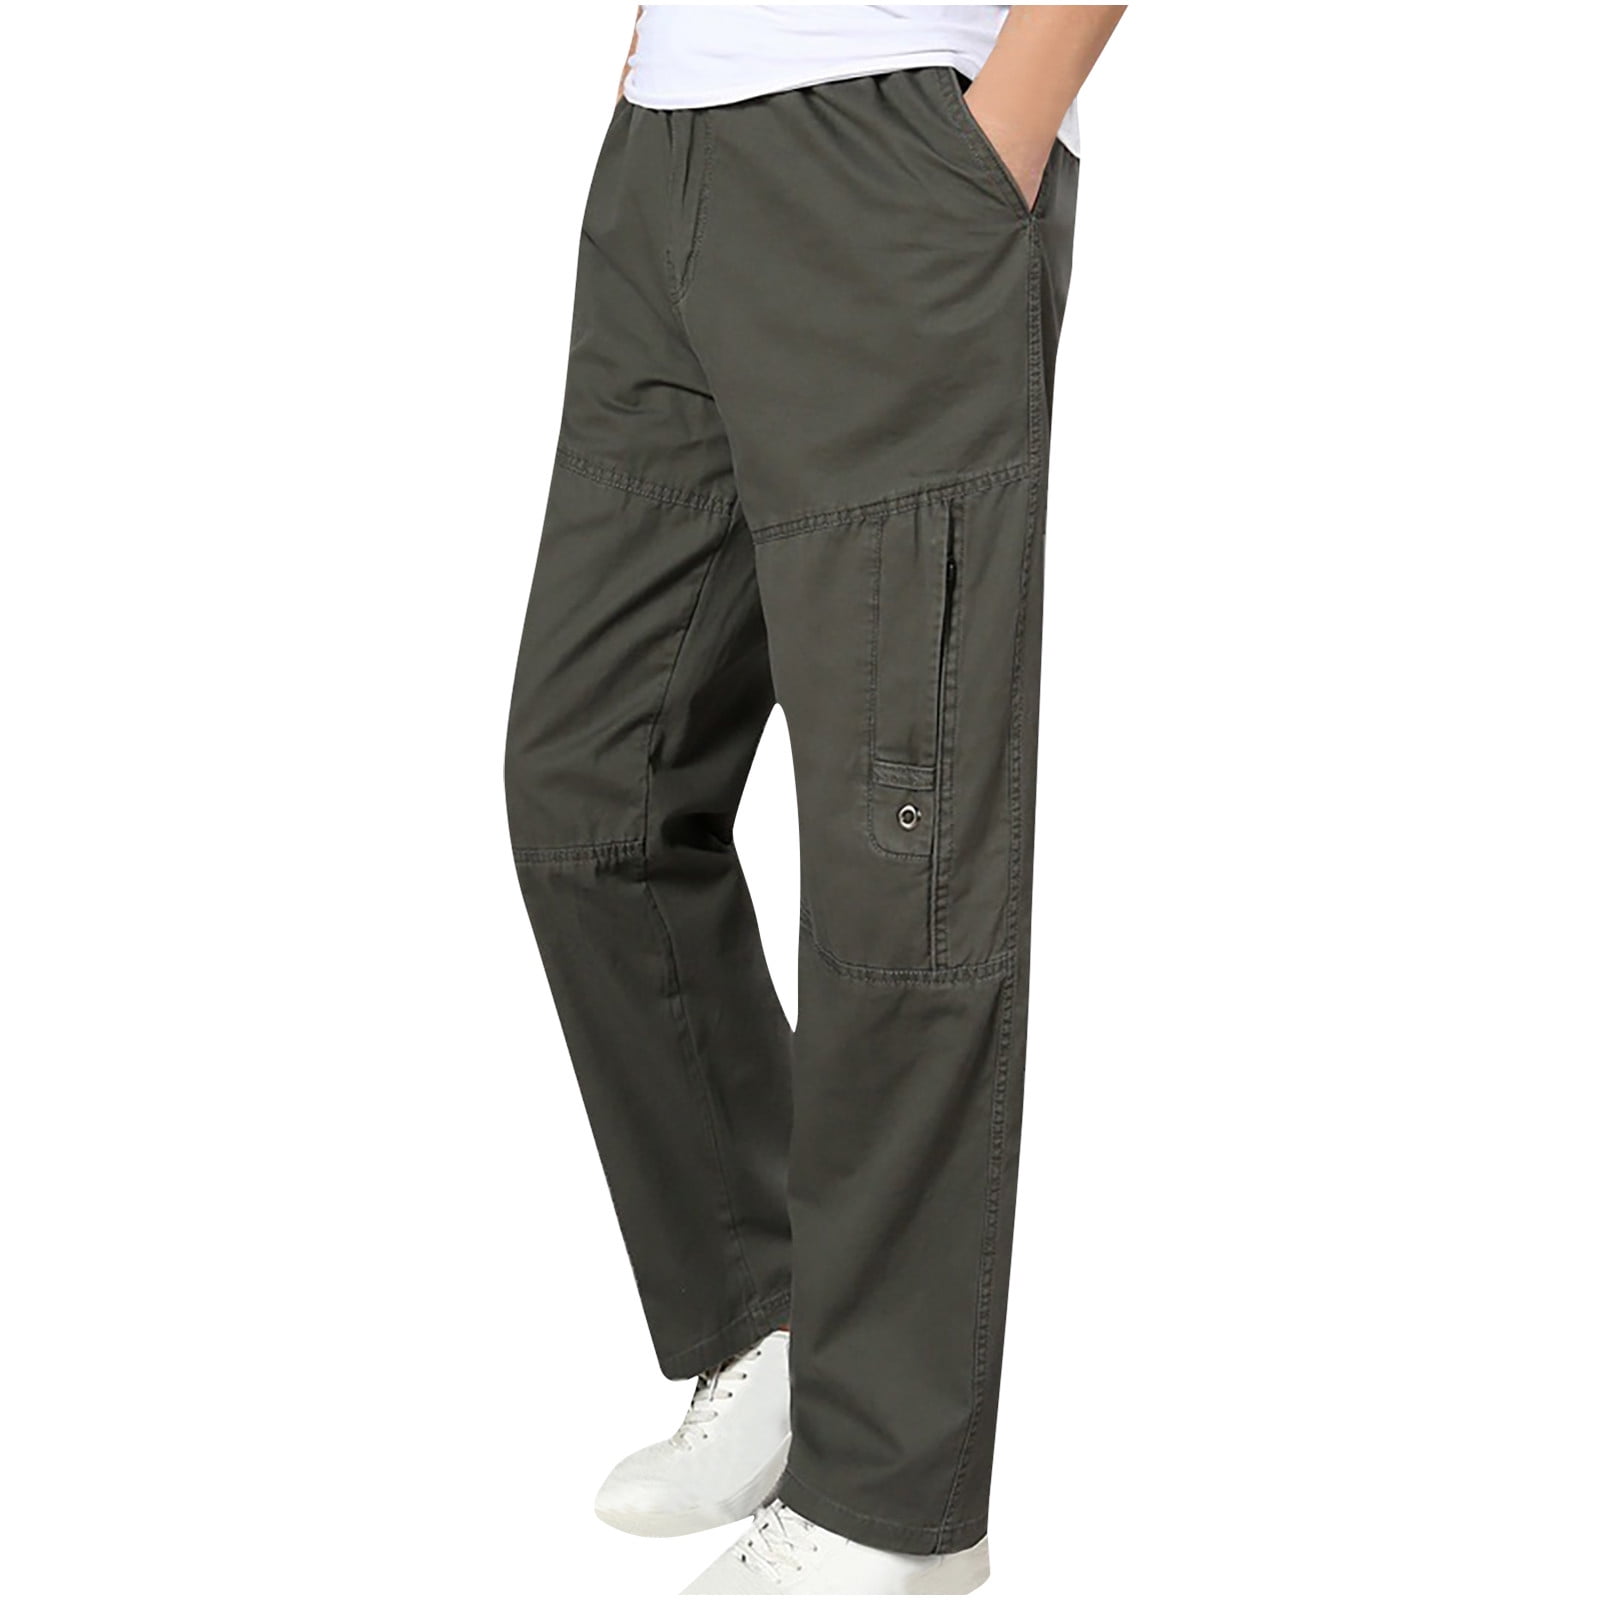 fartey Plus Size Cargo Pant for Men with Multiple Pockets Zipper Elastic  Waist Trousers Baggy Fit Workout Work Hiking Camping Pants, M-5XL 